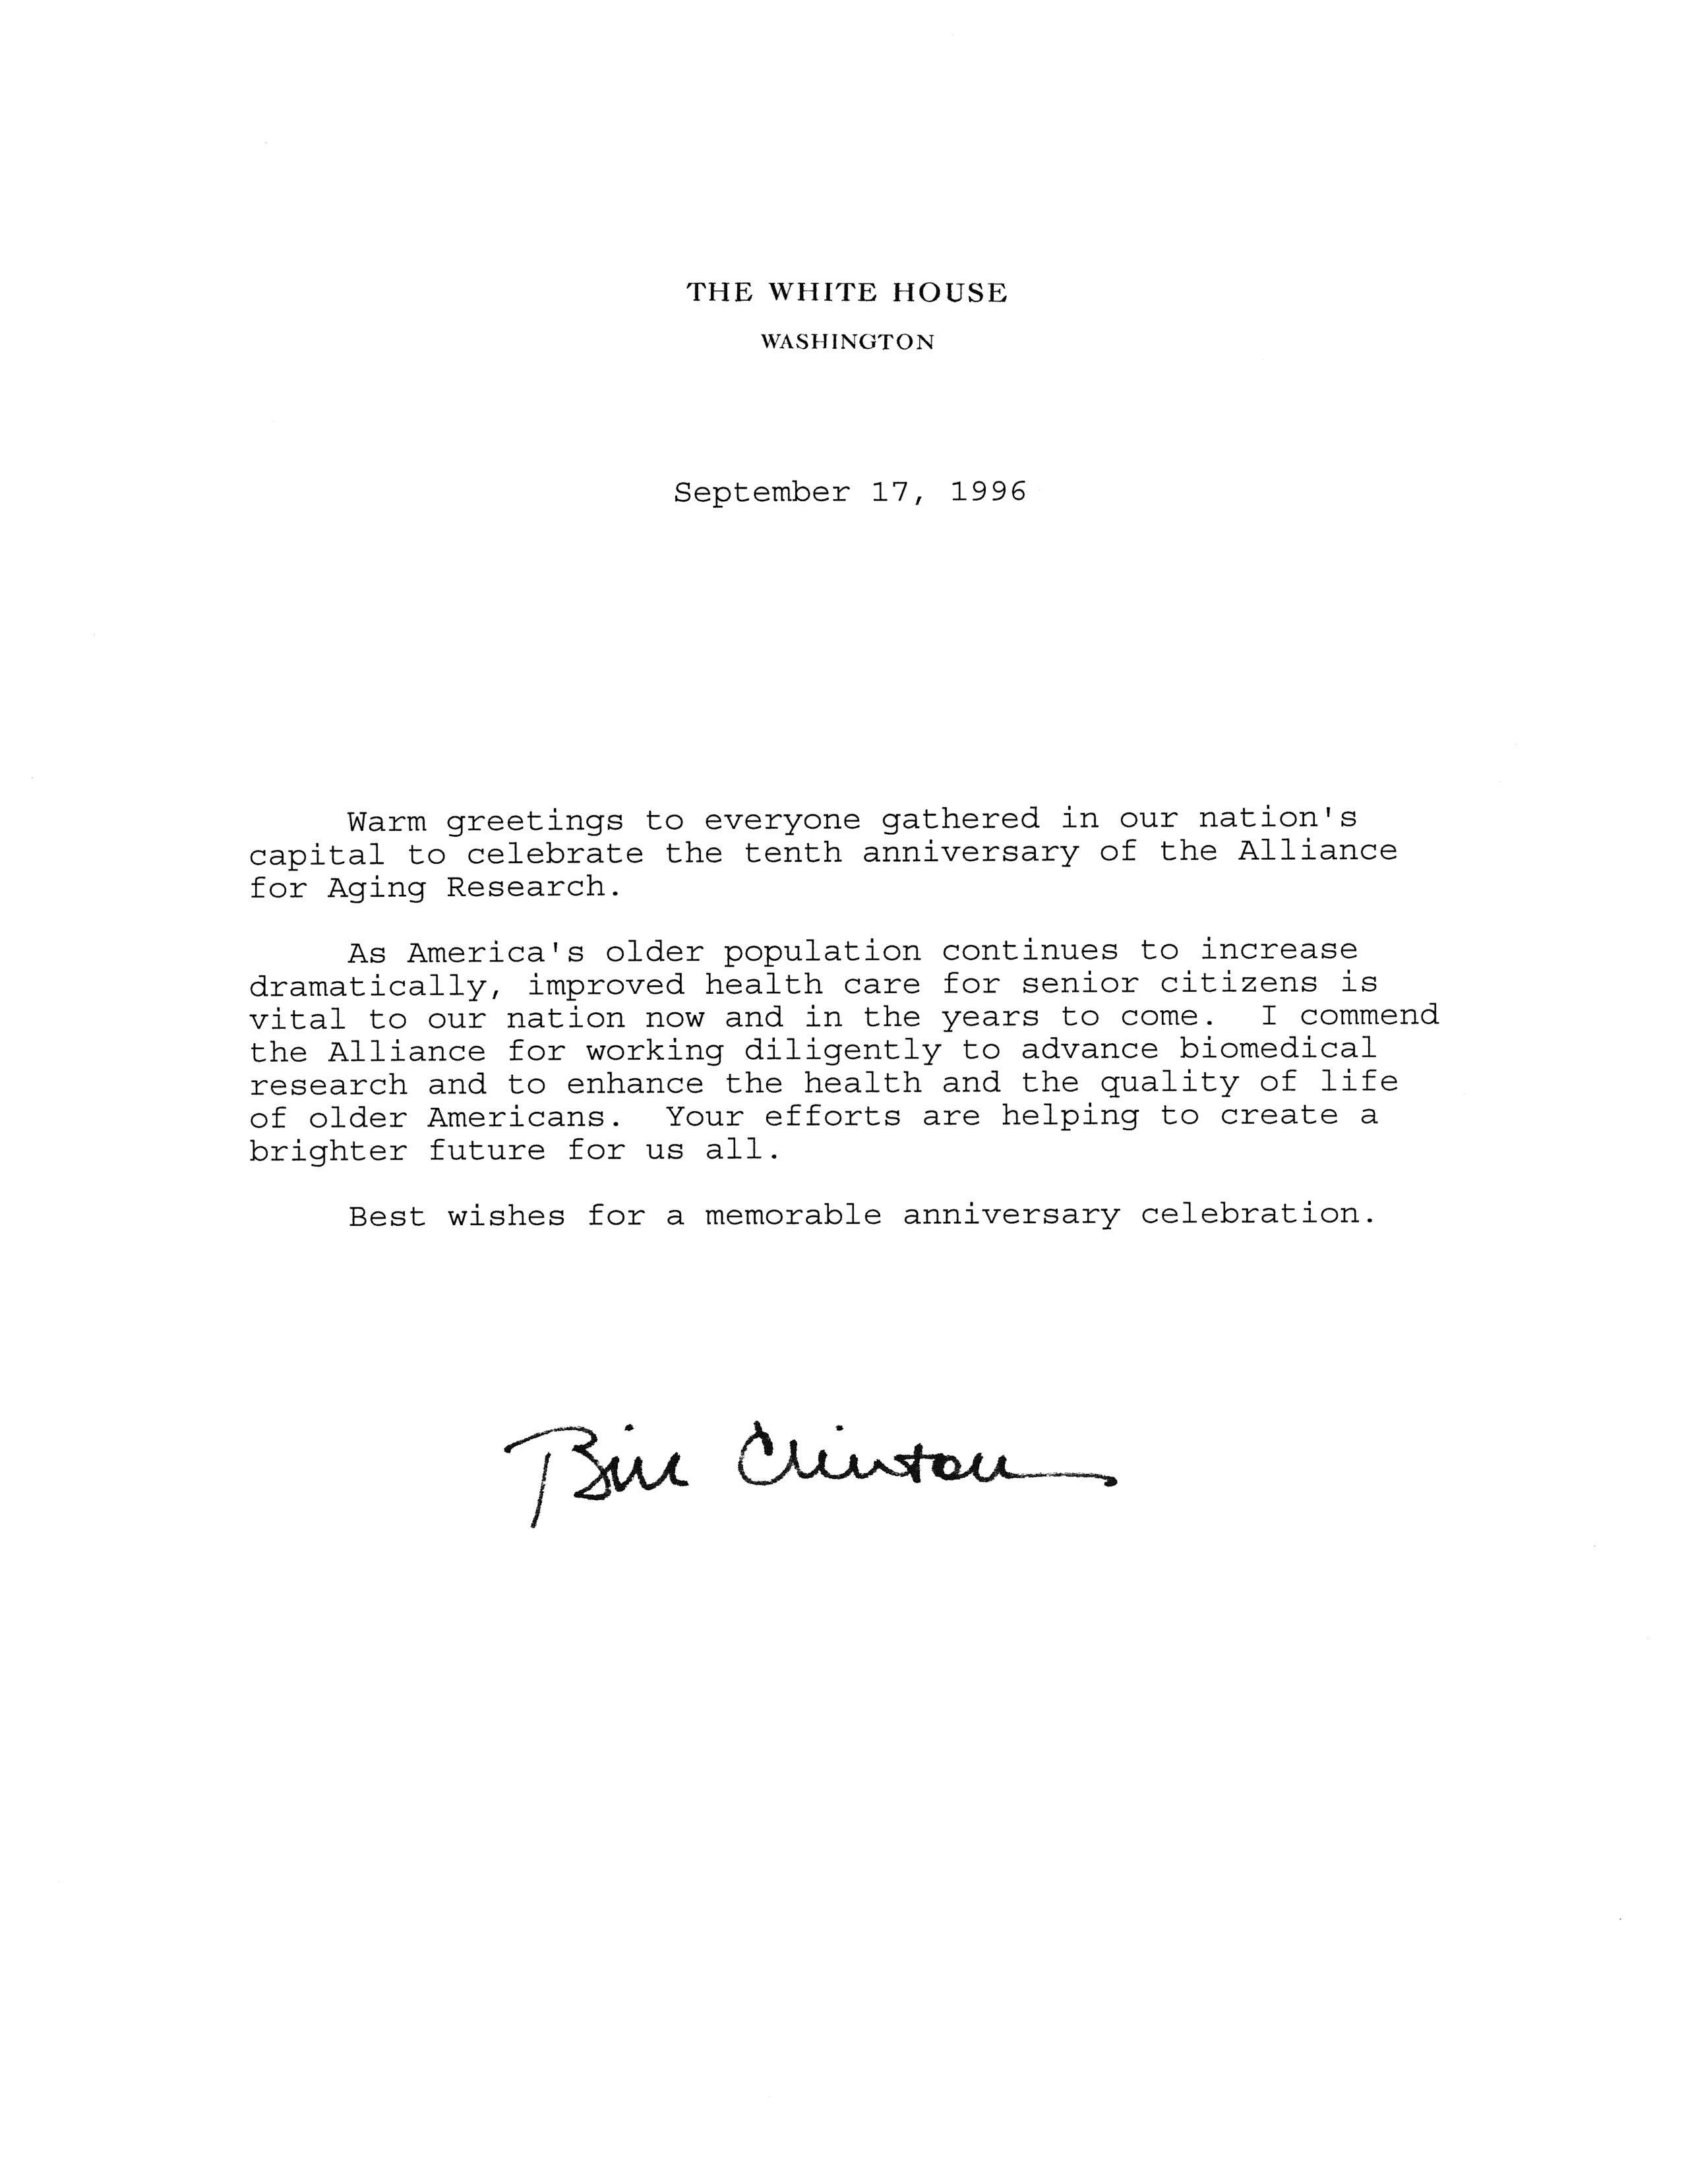 Letter signed by Bill Clinton celebrating the 10th anniversary of the Alliance for Aging Research.